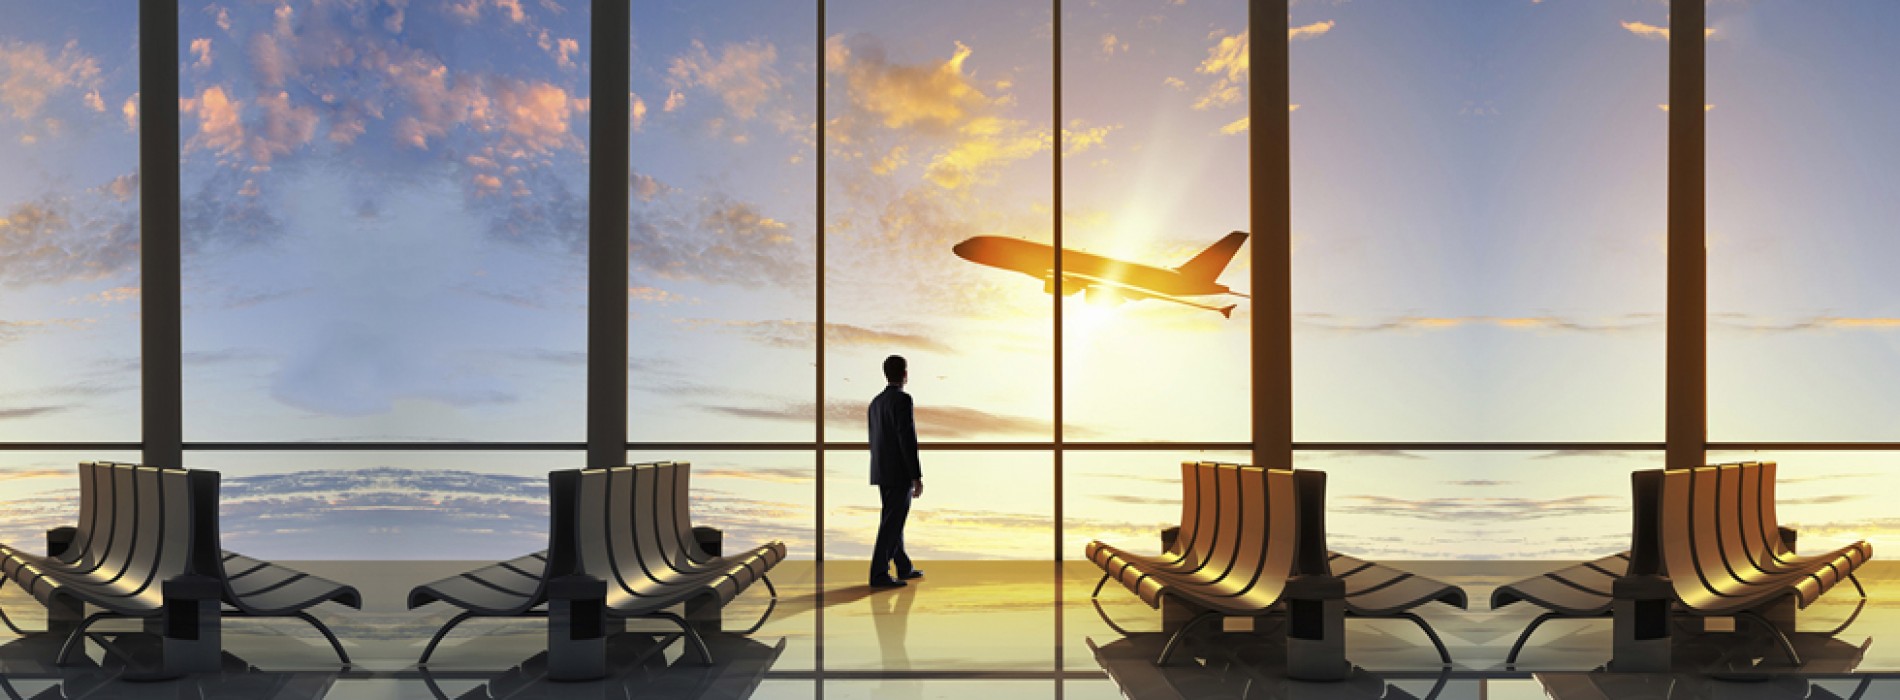 Business travel likely to triple to $93 billion by 2030 says Report